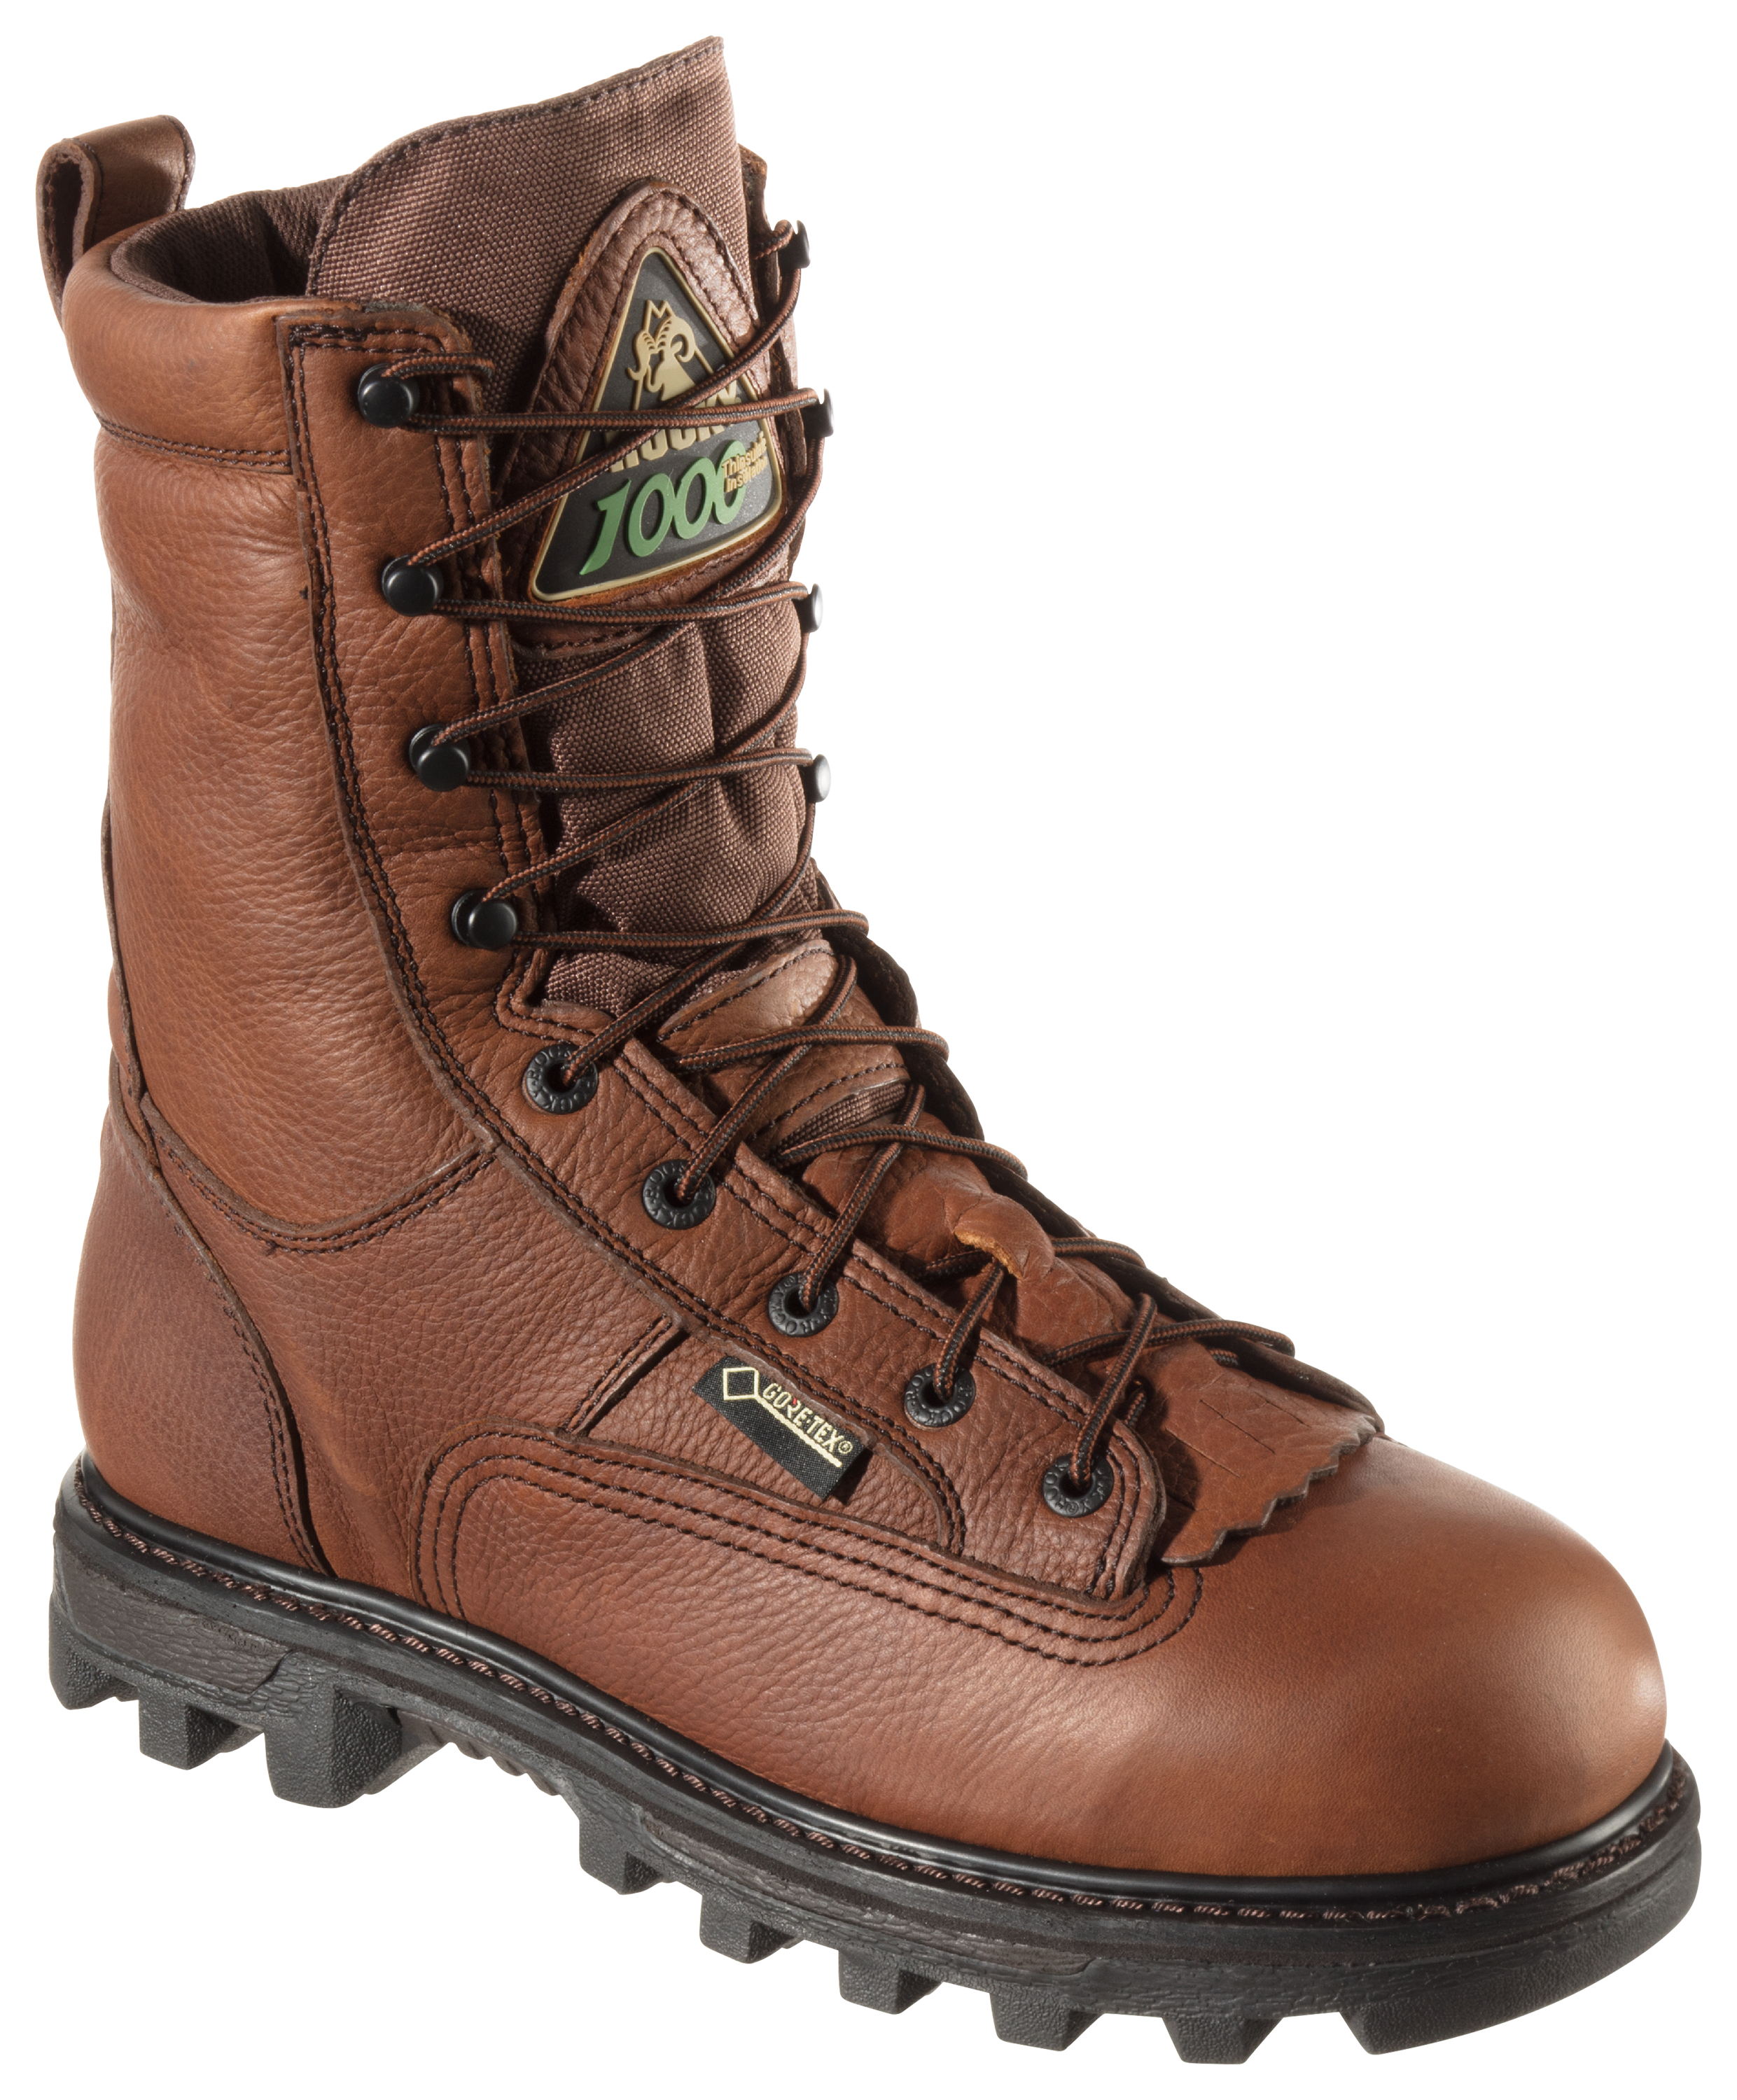 ROCKY BearClaw 3D GORE-TEX 1,000-Gram Insulated Hunting Boots for Men - Brown - 11W